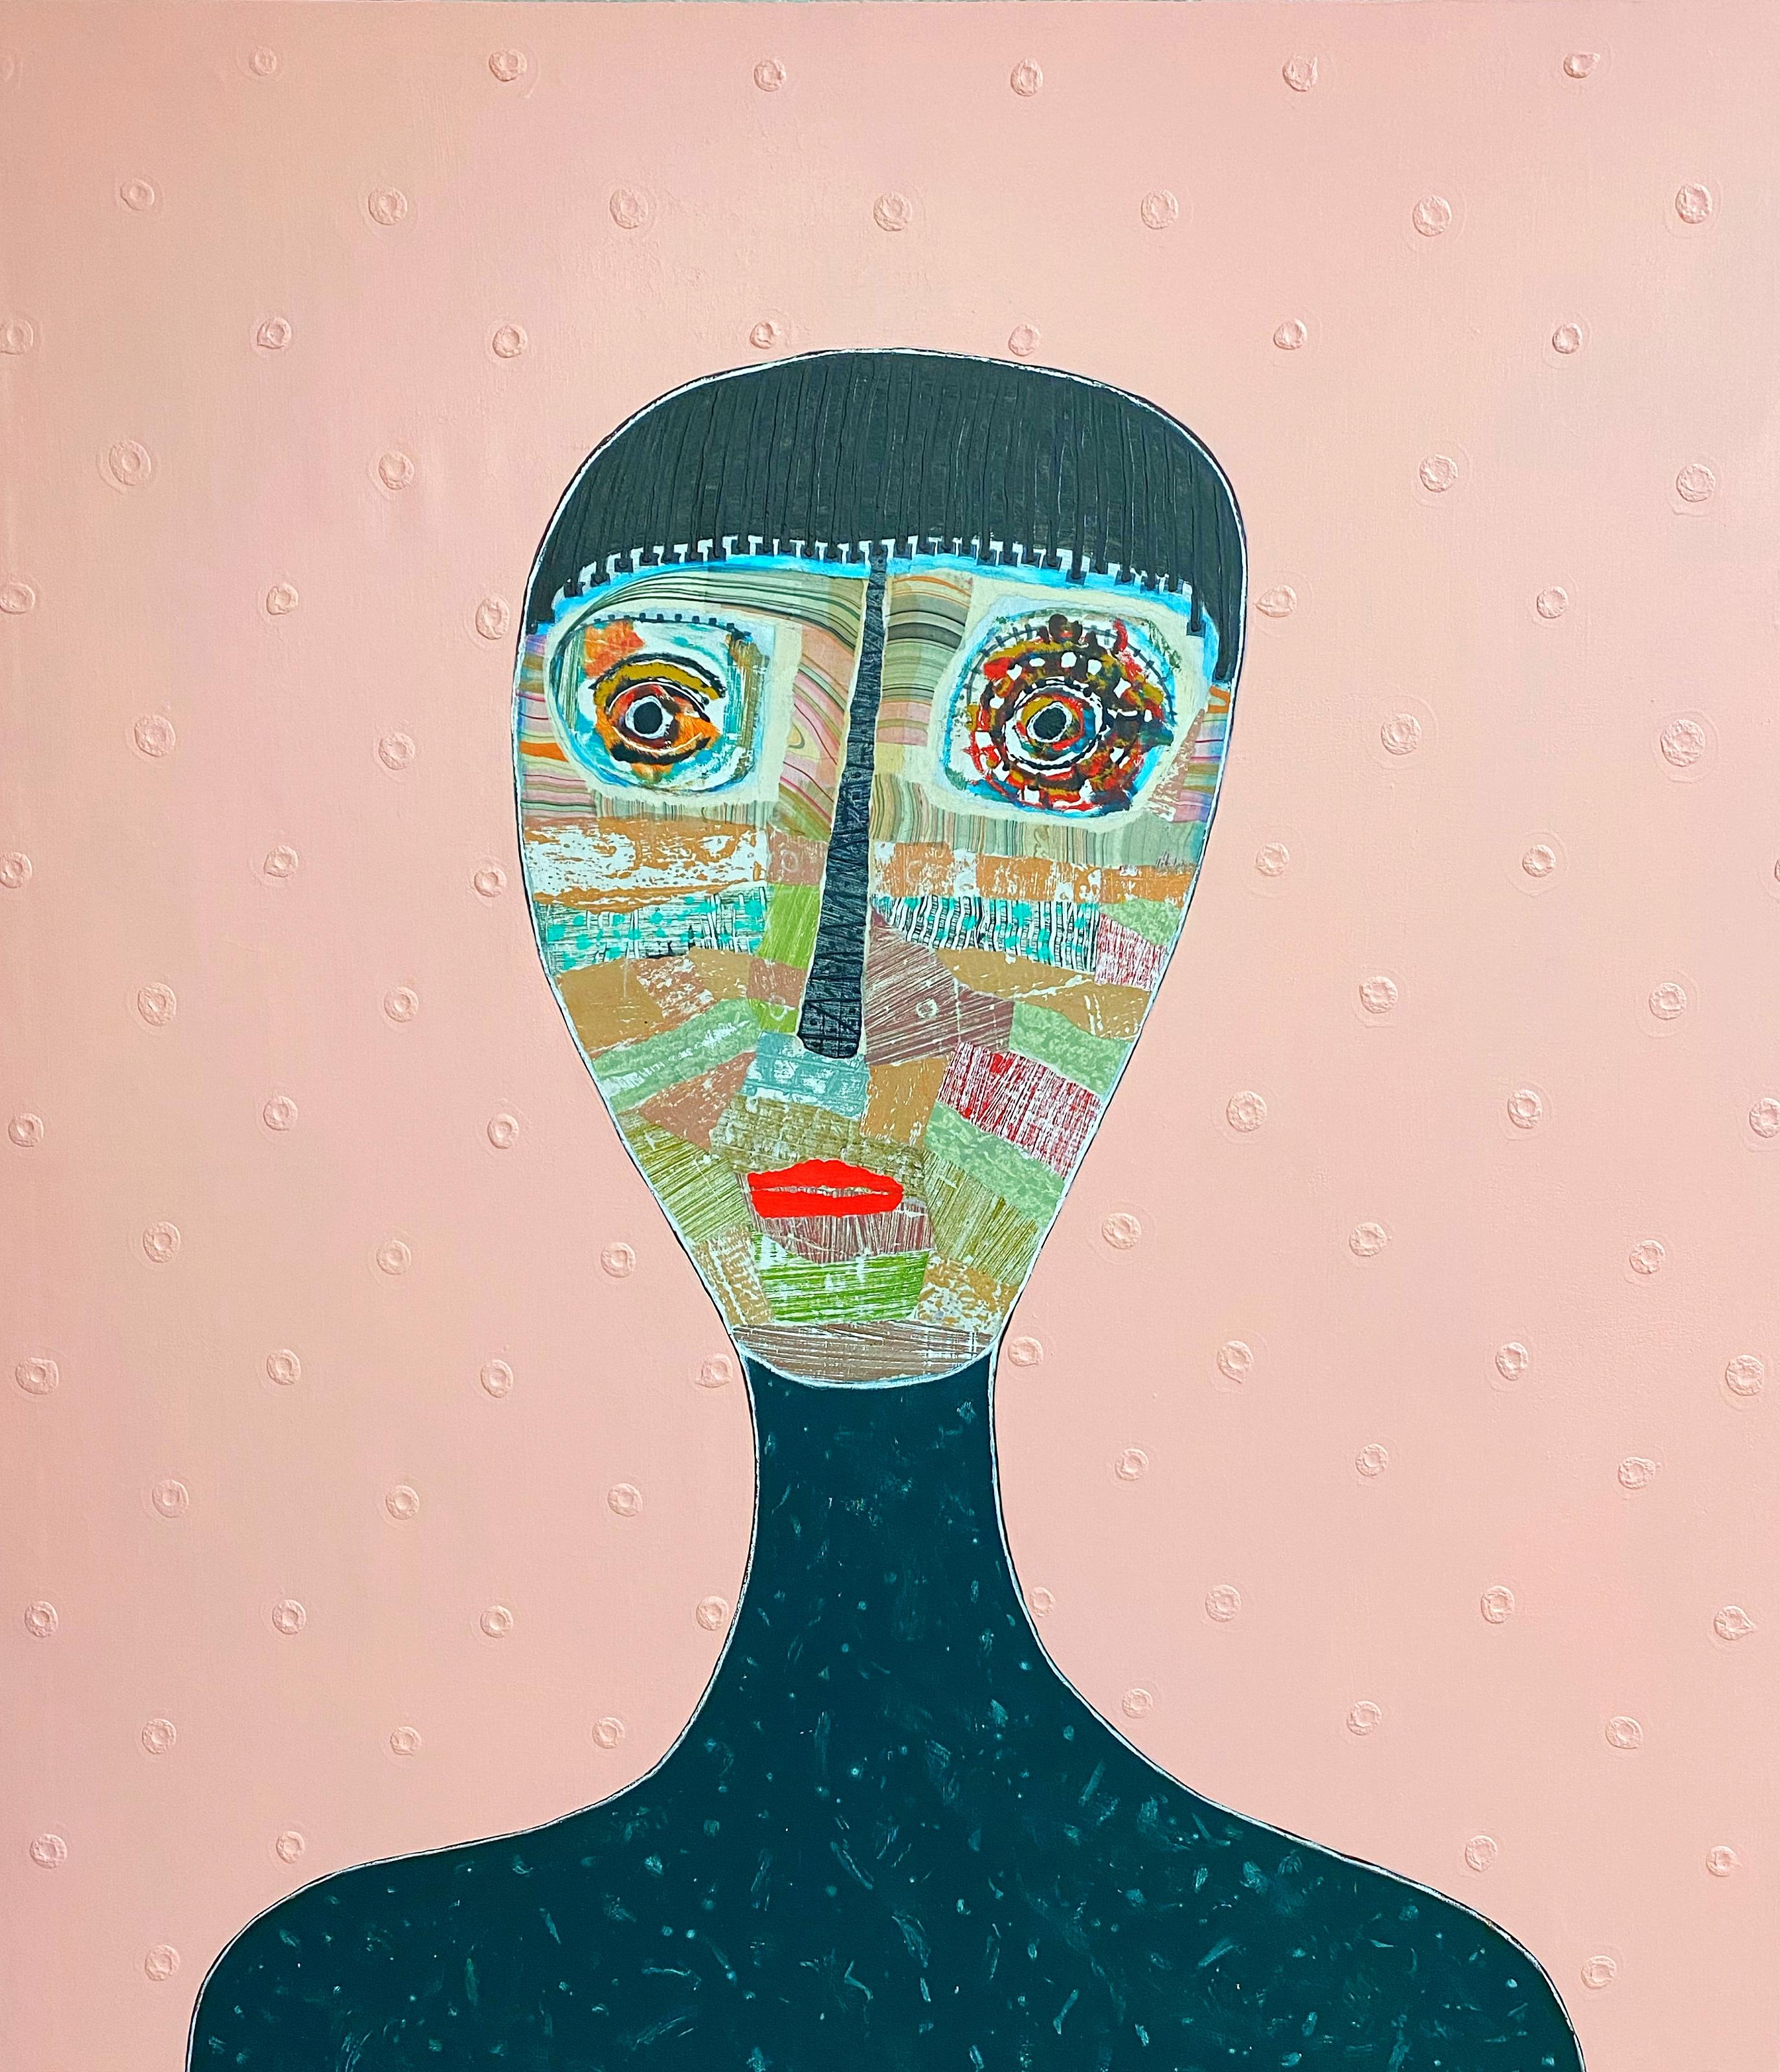 Figurative Pink Mixed Media Portrait Painting by Cuban Artist Hector Frank.

Unique Painting with a certificate of authenticity.

Despite international acclaim as one Cuba’s foremost living artists, Havana born Hector Frank never received a